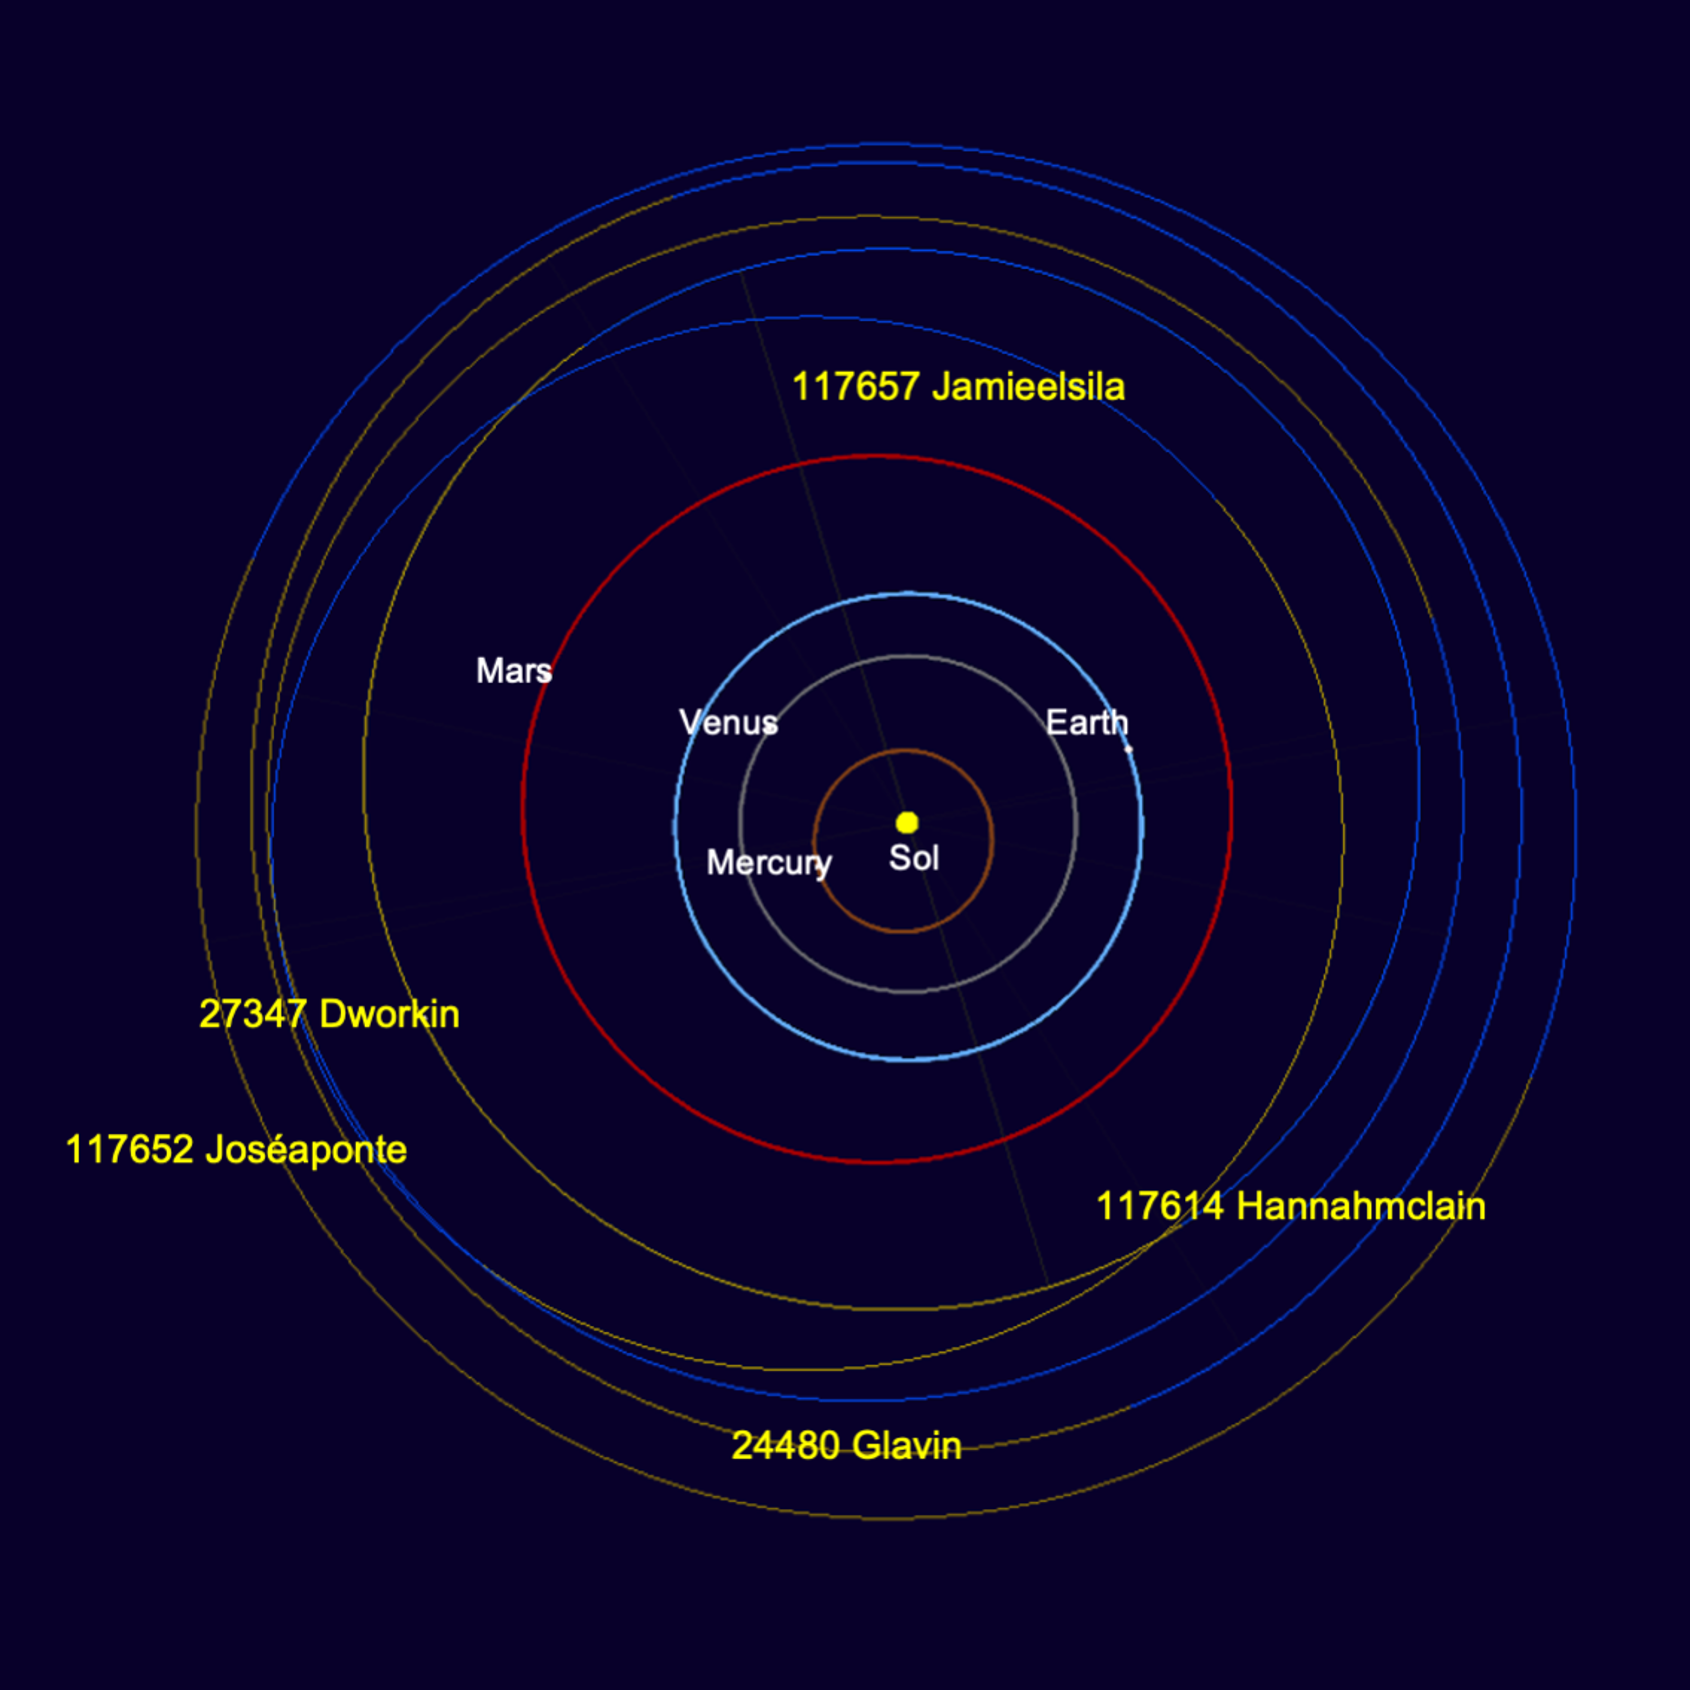 Diagram of the inner solar system showing orbits of asteroids named Jamieelsila, Dworkin, Joséaponte, Hannahmclain, and Glavin.